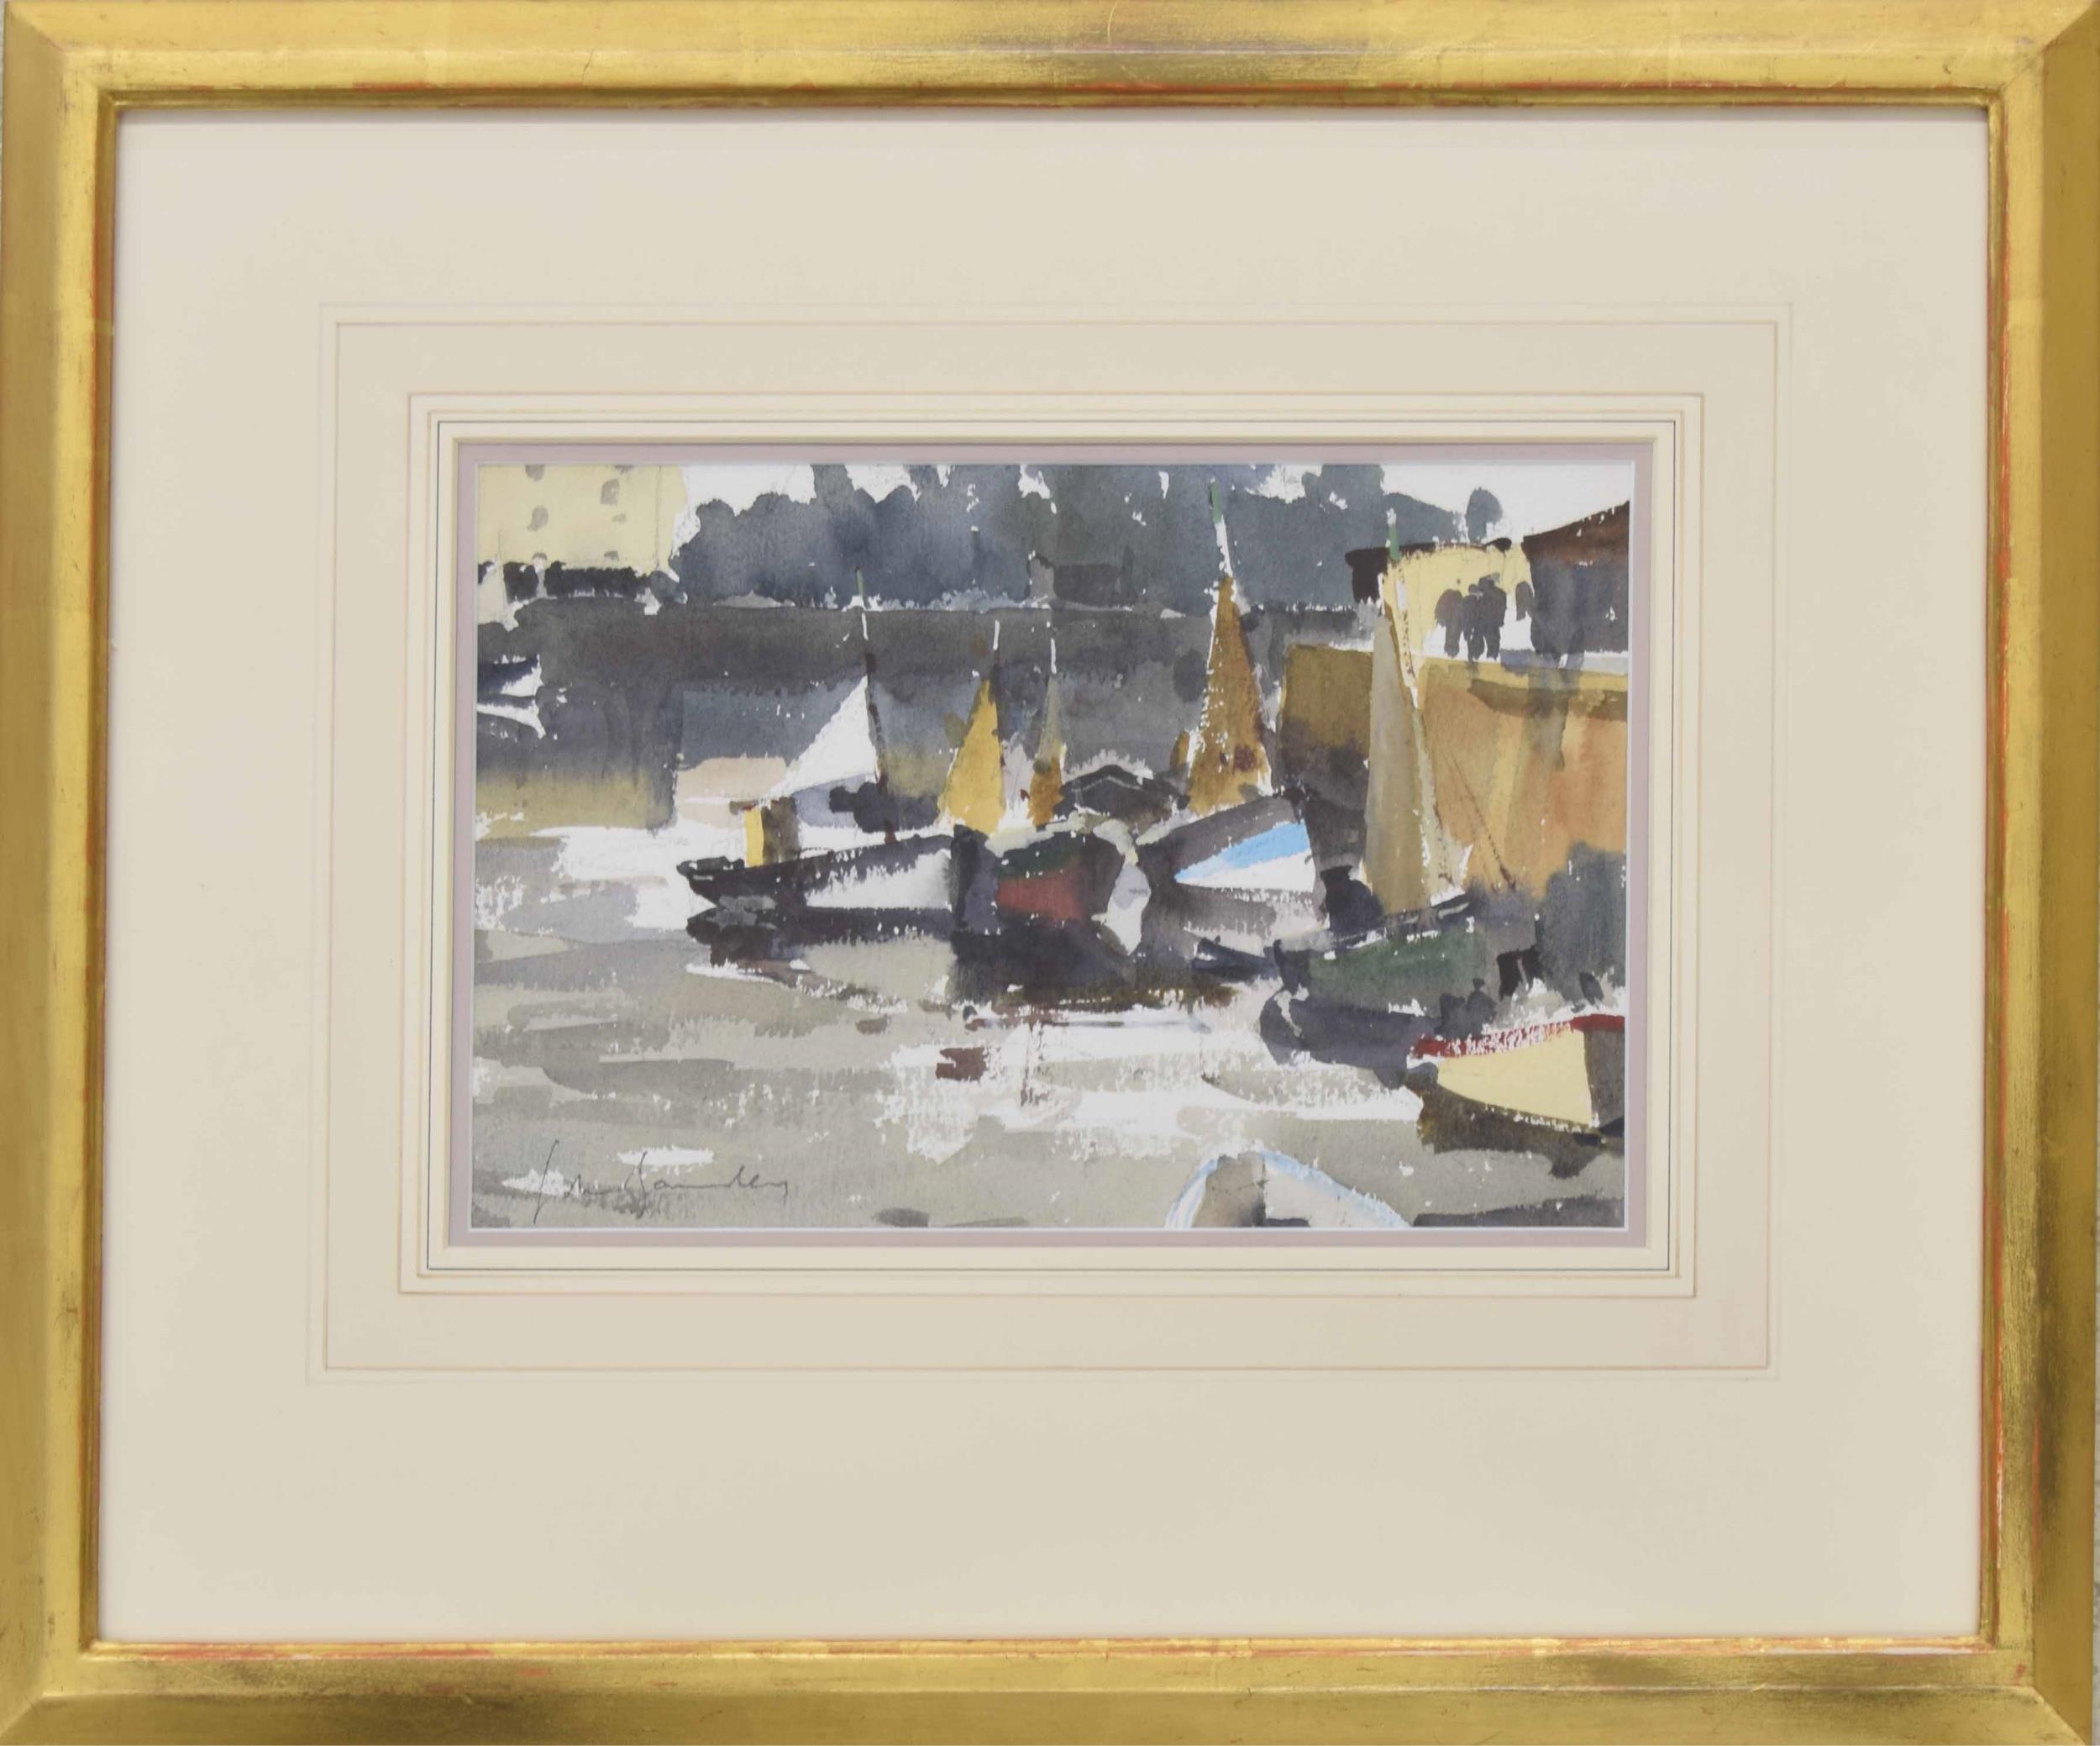 John Yardley Hon, Rtd, RI (b. 1933) - 'Boats in a sunlit harbour' with figures on a quayside nearby,